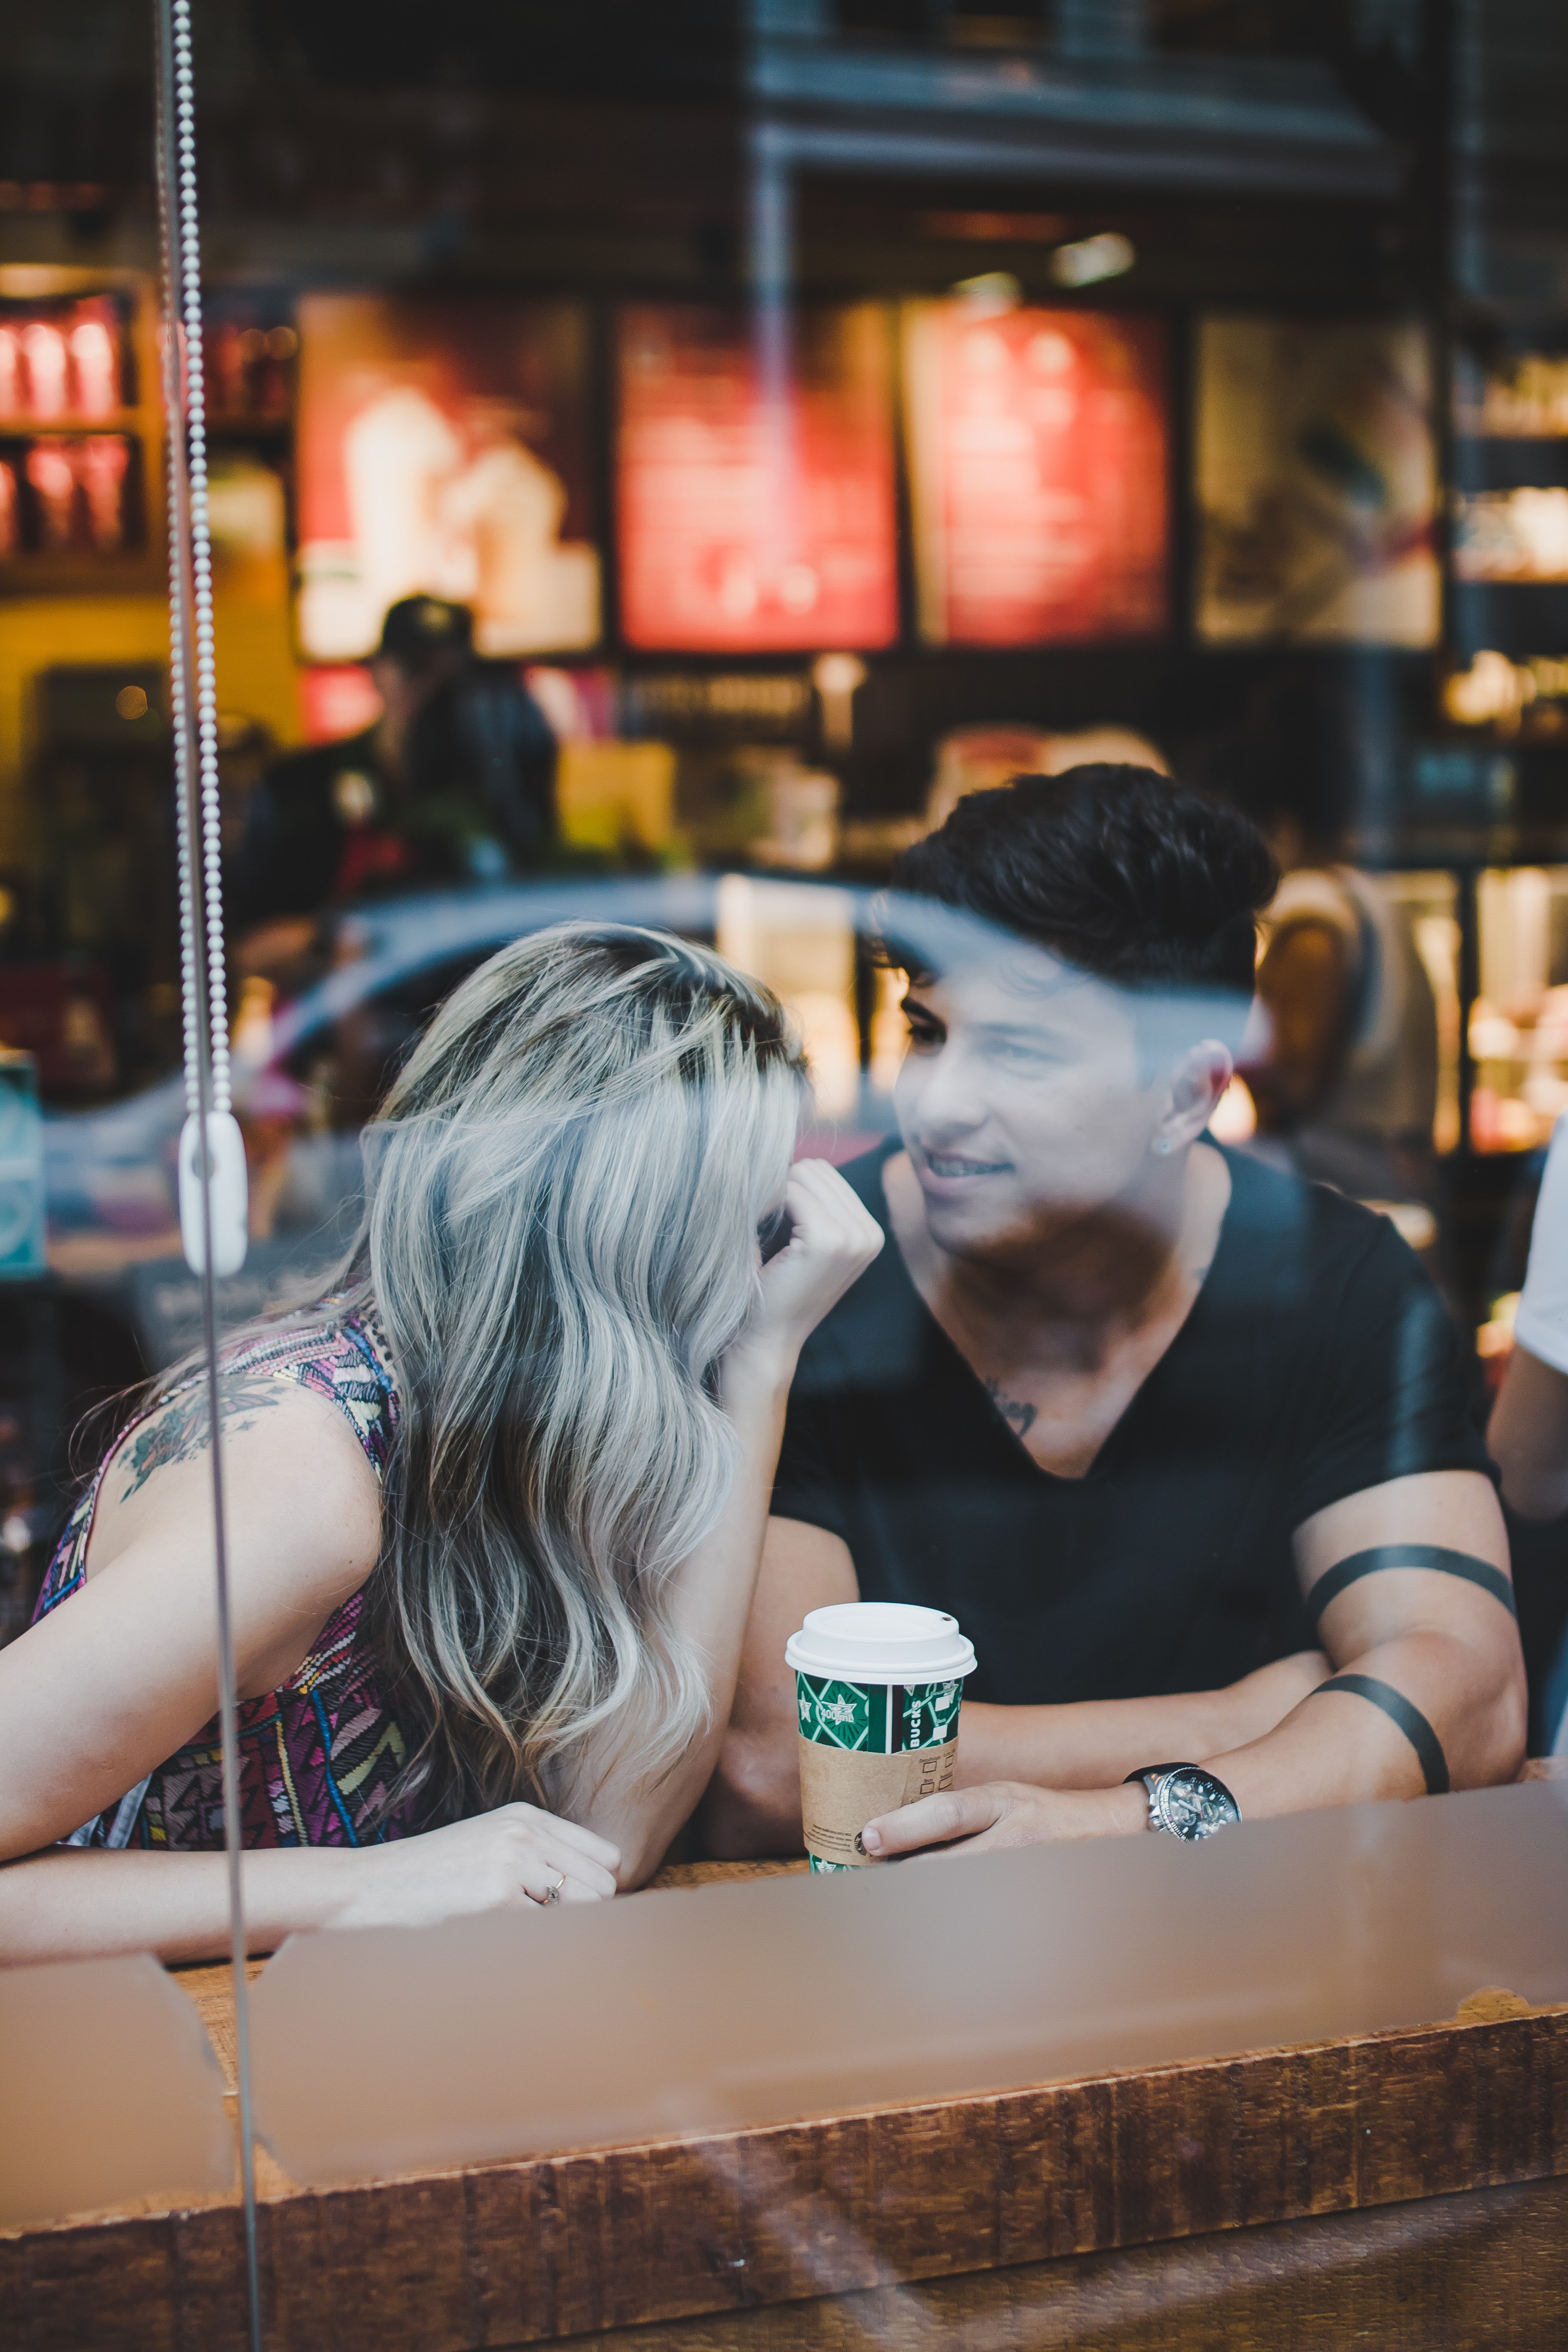 Customers at a coffee shop | Source: Pexels